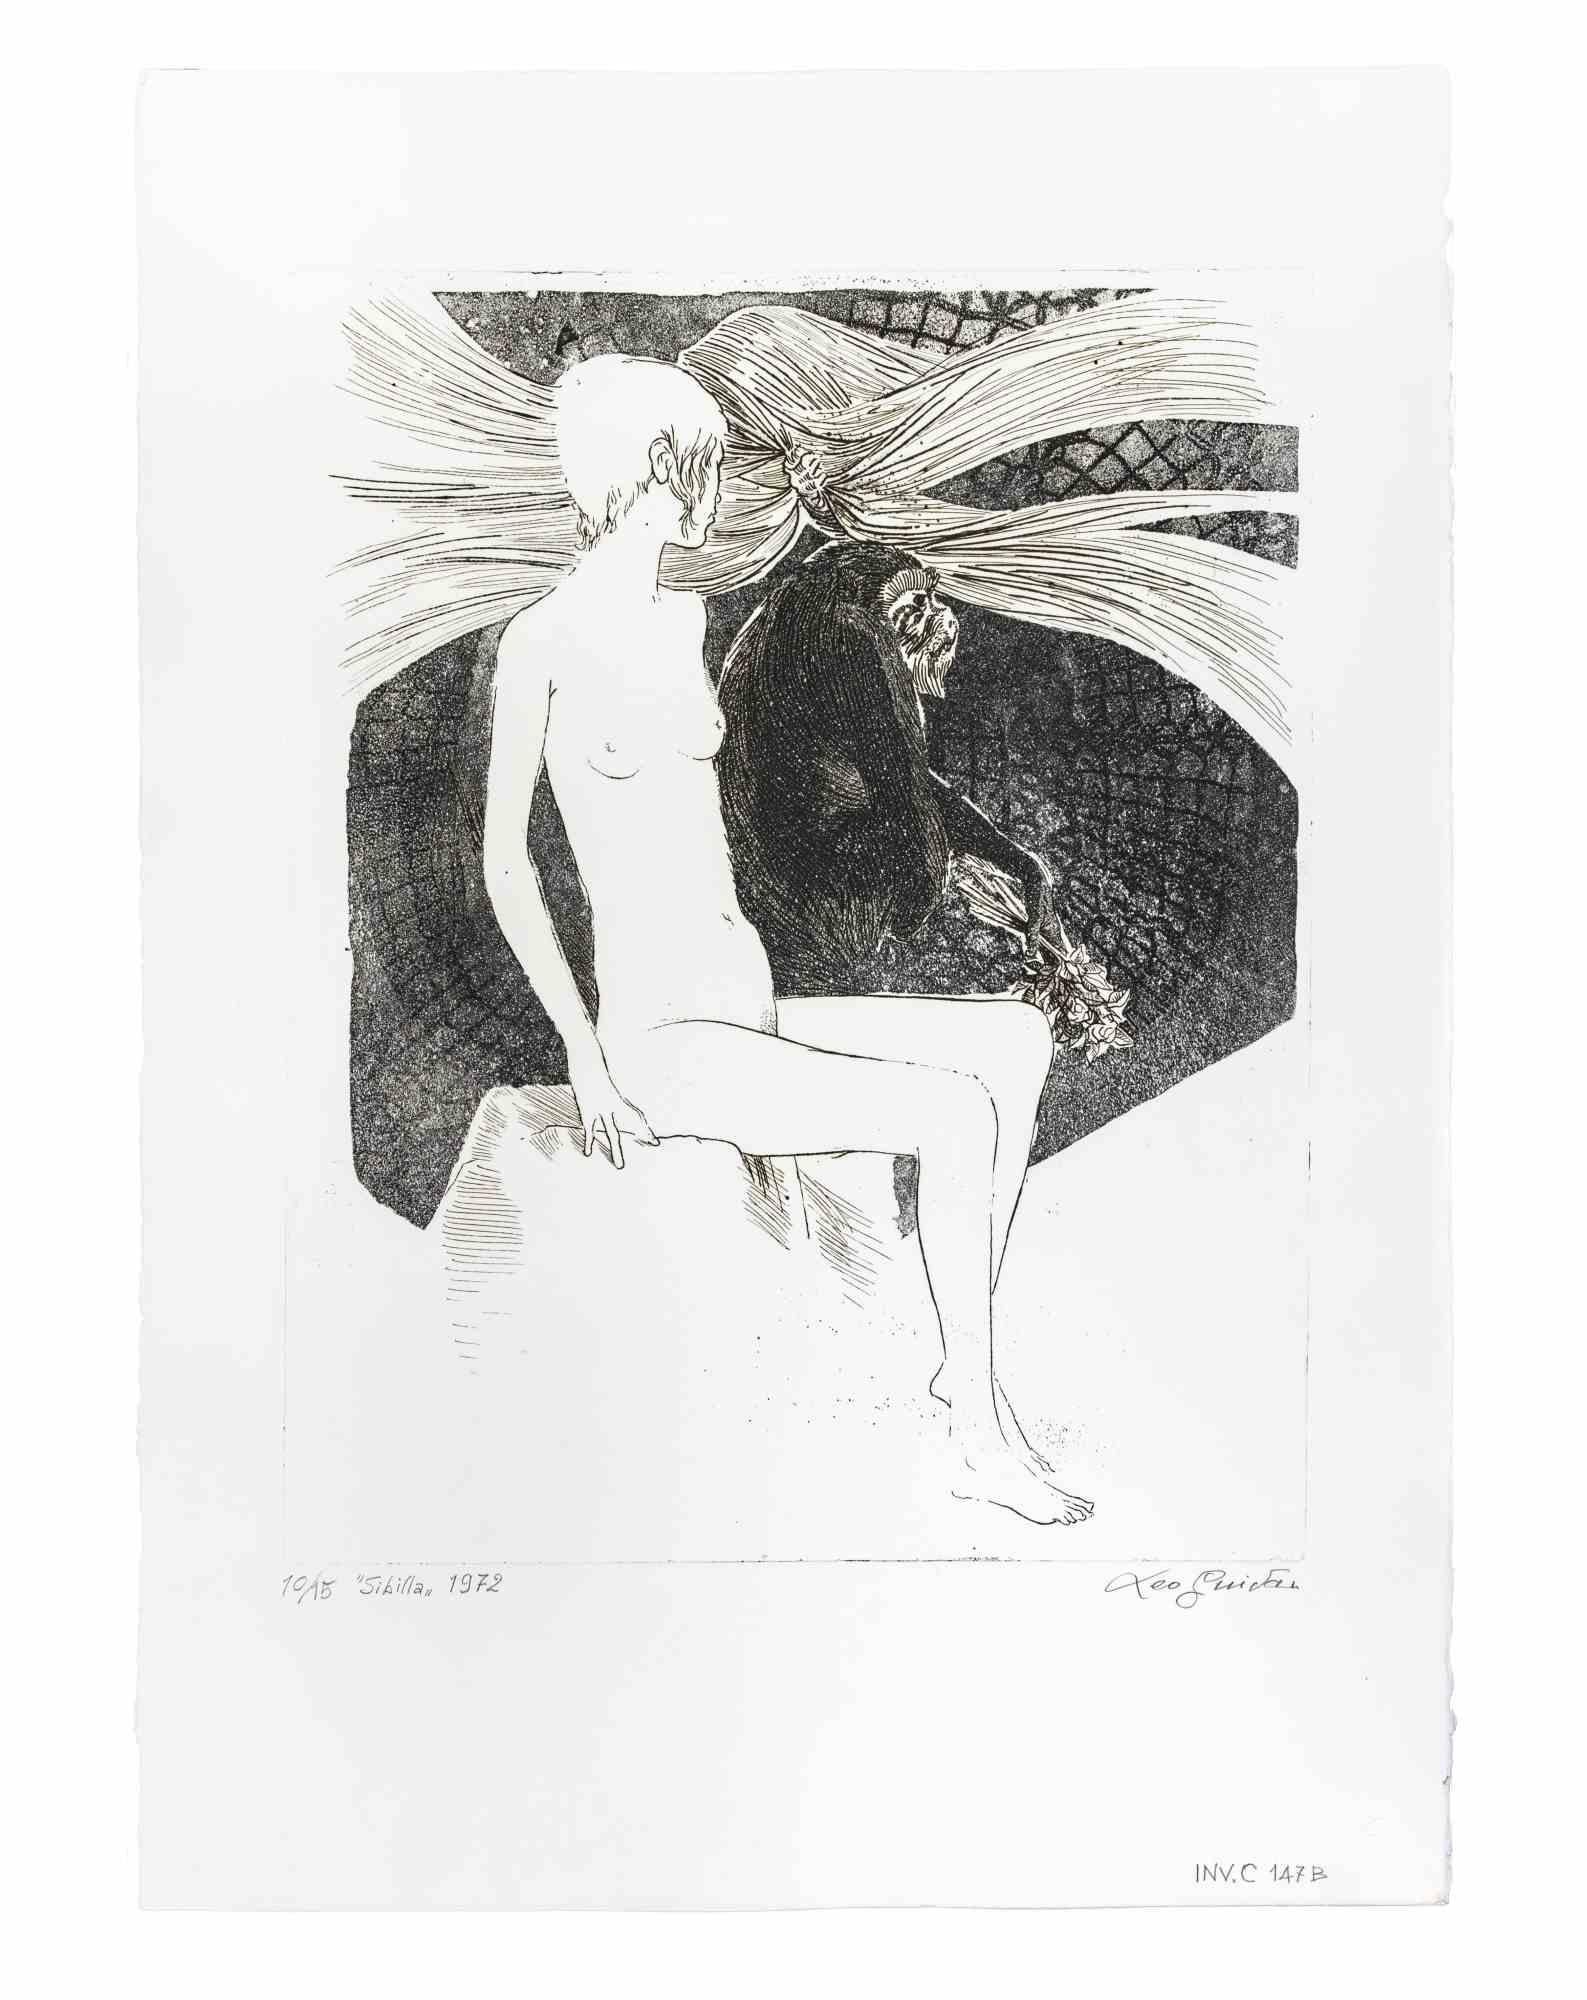 Sibilla (Sibyl) is an artwork realized by the italian Contemporary artist  Leo Guida (1992 - 2017) in 1975s.

Original black and white etching on paper.

Hand Signed on the lower right margin.Titled, dated and numbered, ex. 10/15, on the lower left